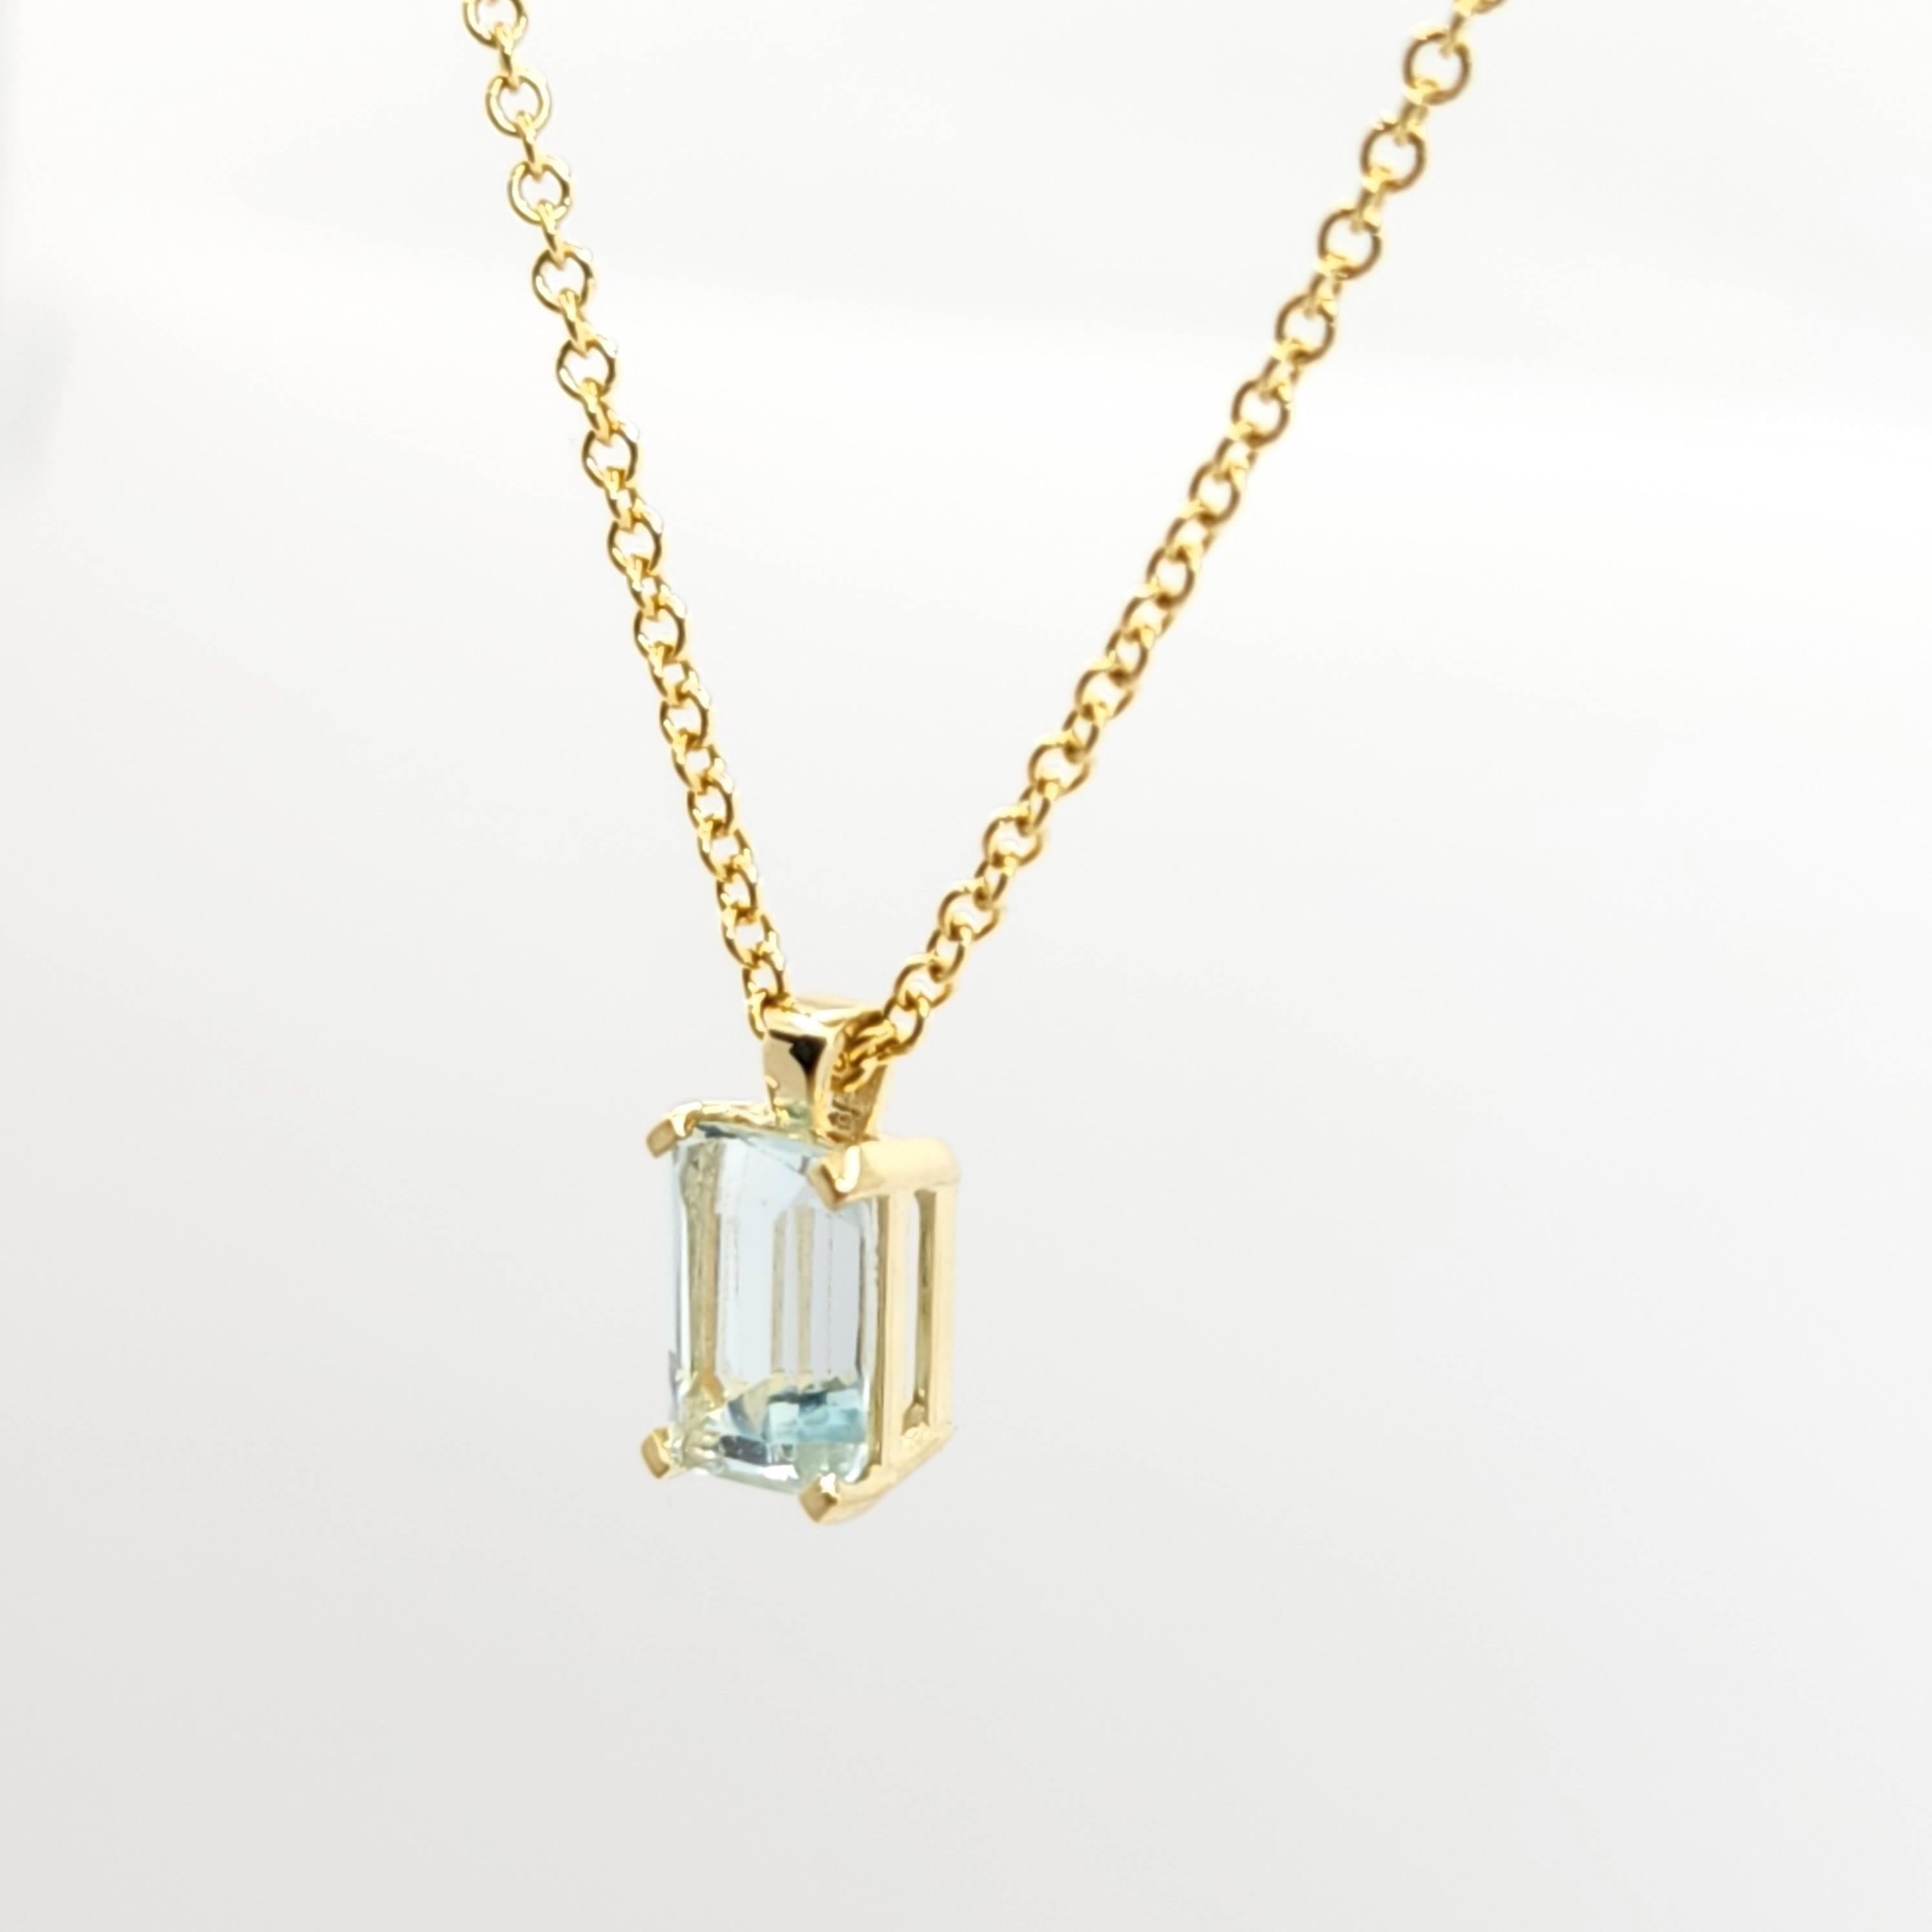 Embrace the allure of our Aquamarine Necklace, a best-selling piece crafted from elegant 14k gold and adorned with a hand-selected Aquamarine natural Gemstone. Its timeless design and unmatched quality make it an essential addition to any jewelry